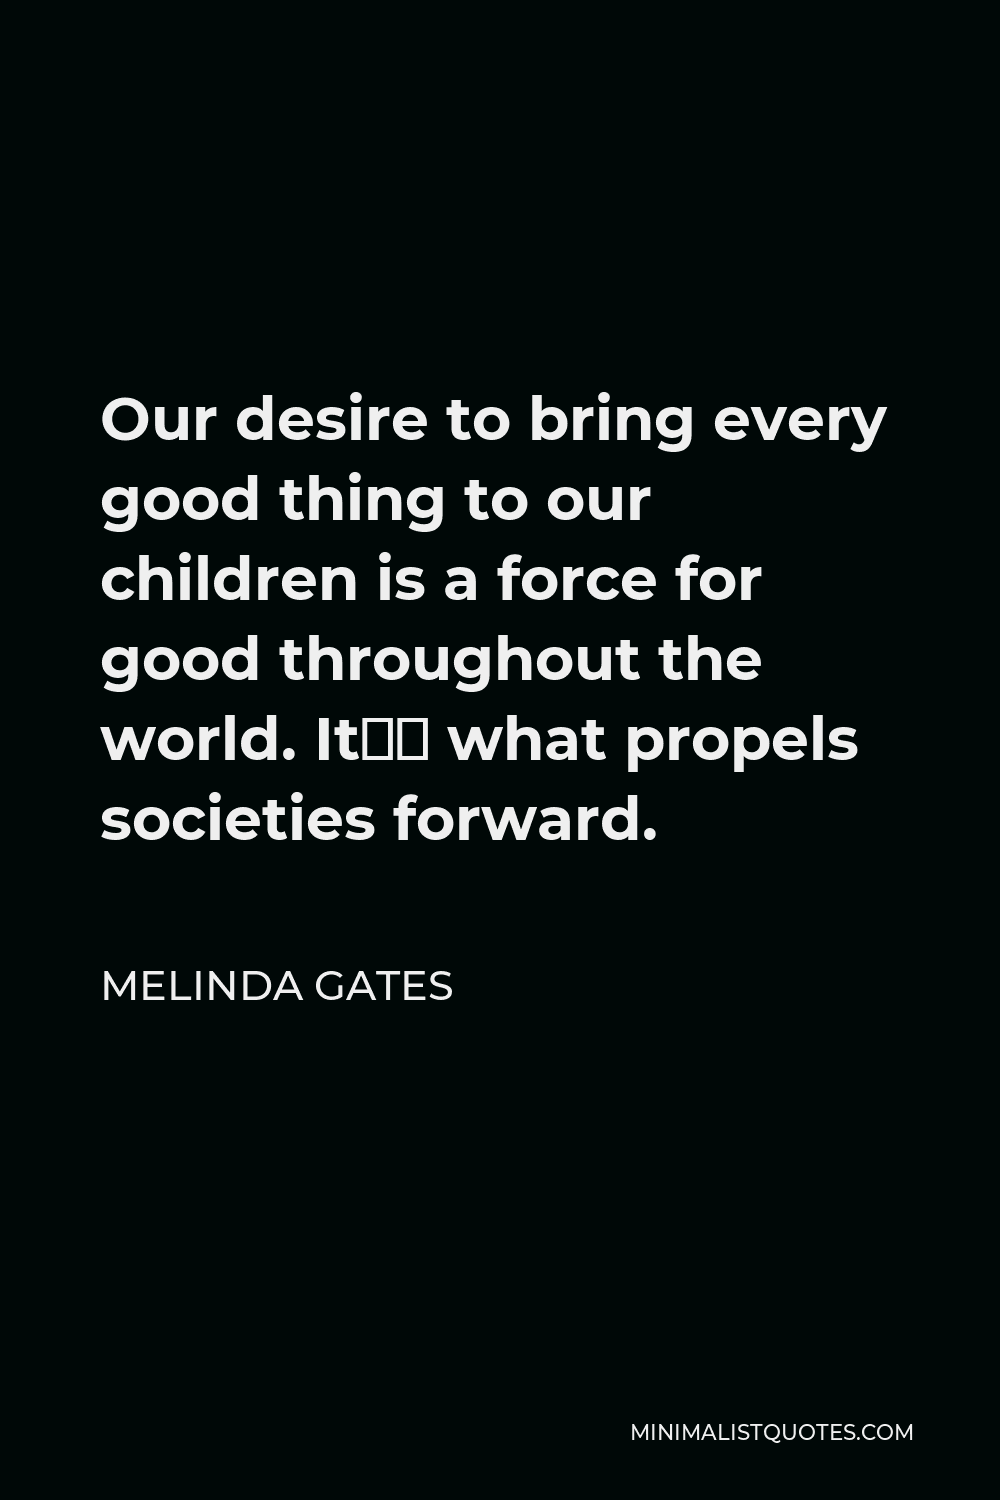 Melinda Gates Quote - Our desire to bring every good thing to our children is a force for good throughout the world. It’s what propels societies forward.